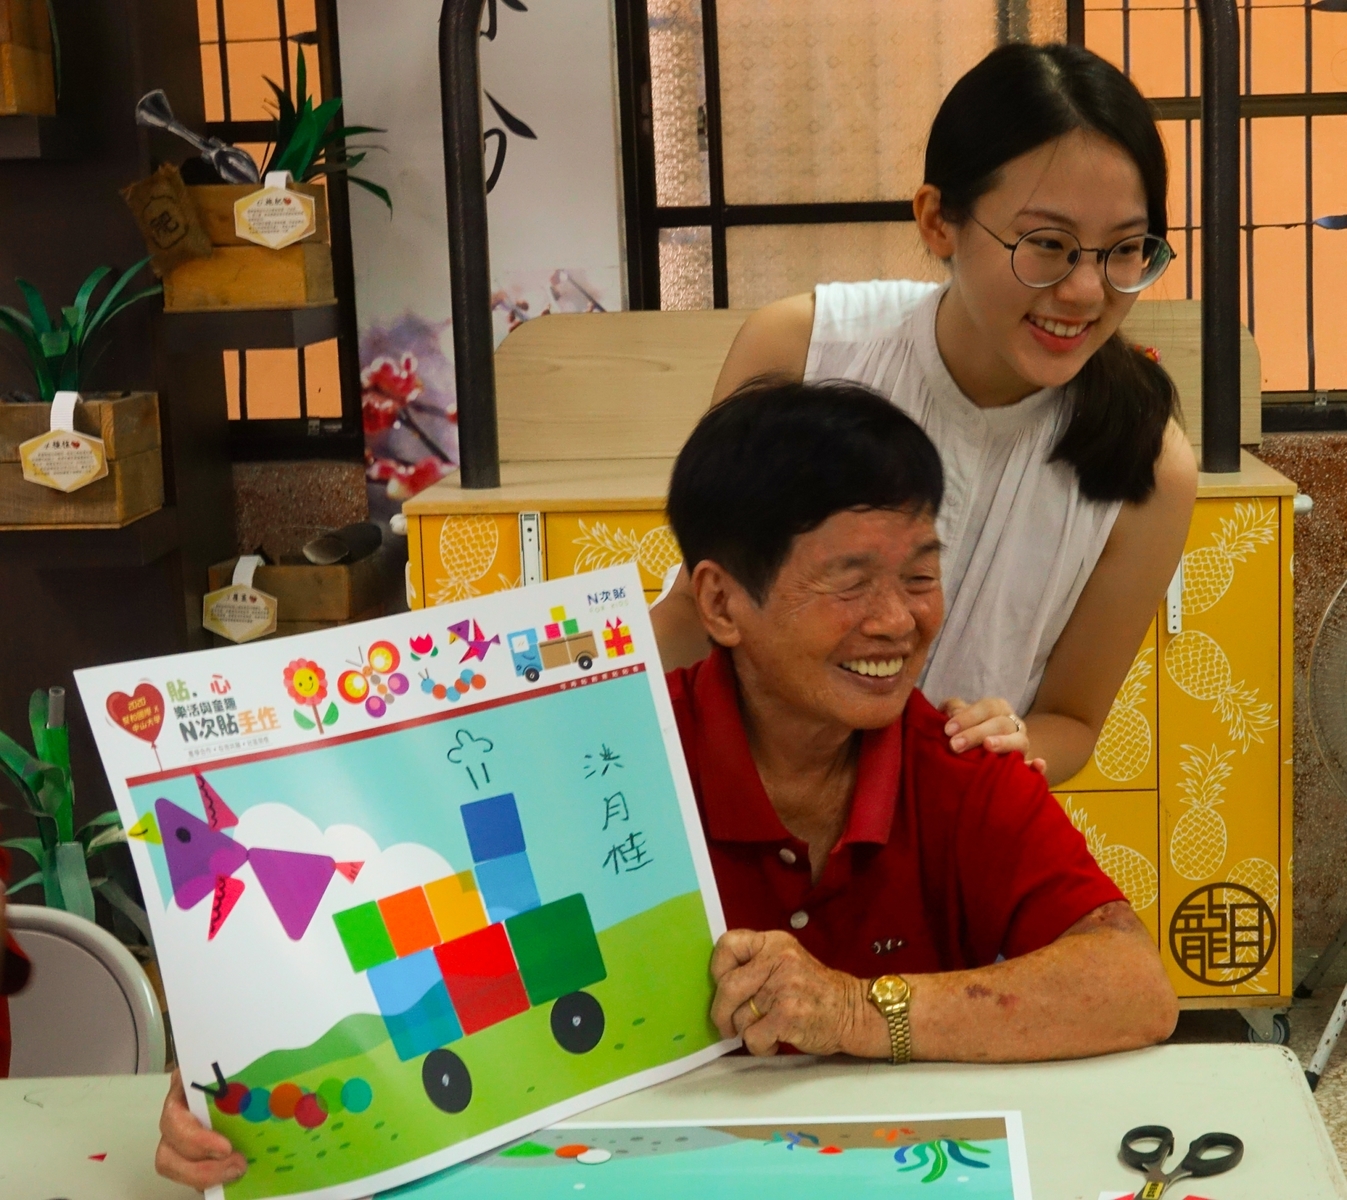 The USR project at National Sun Yat-sen University matchmakes local enterprises with art and culture groups for community welfare. (Photo by NSYSU)